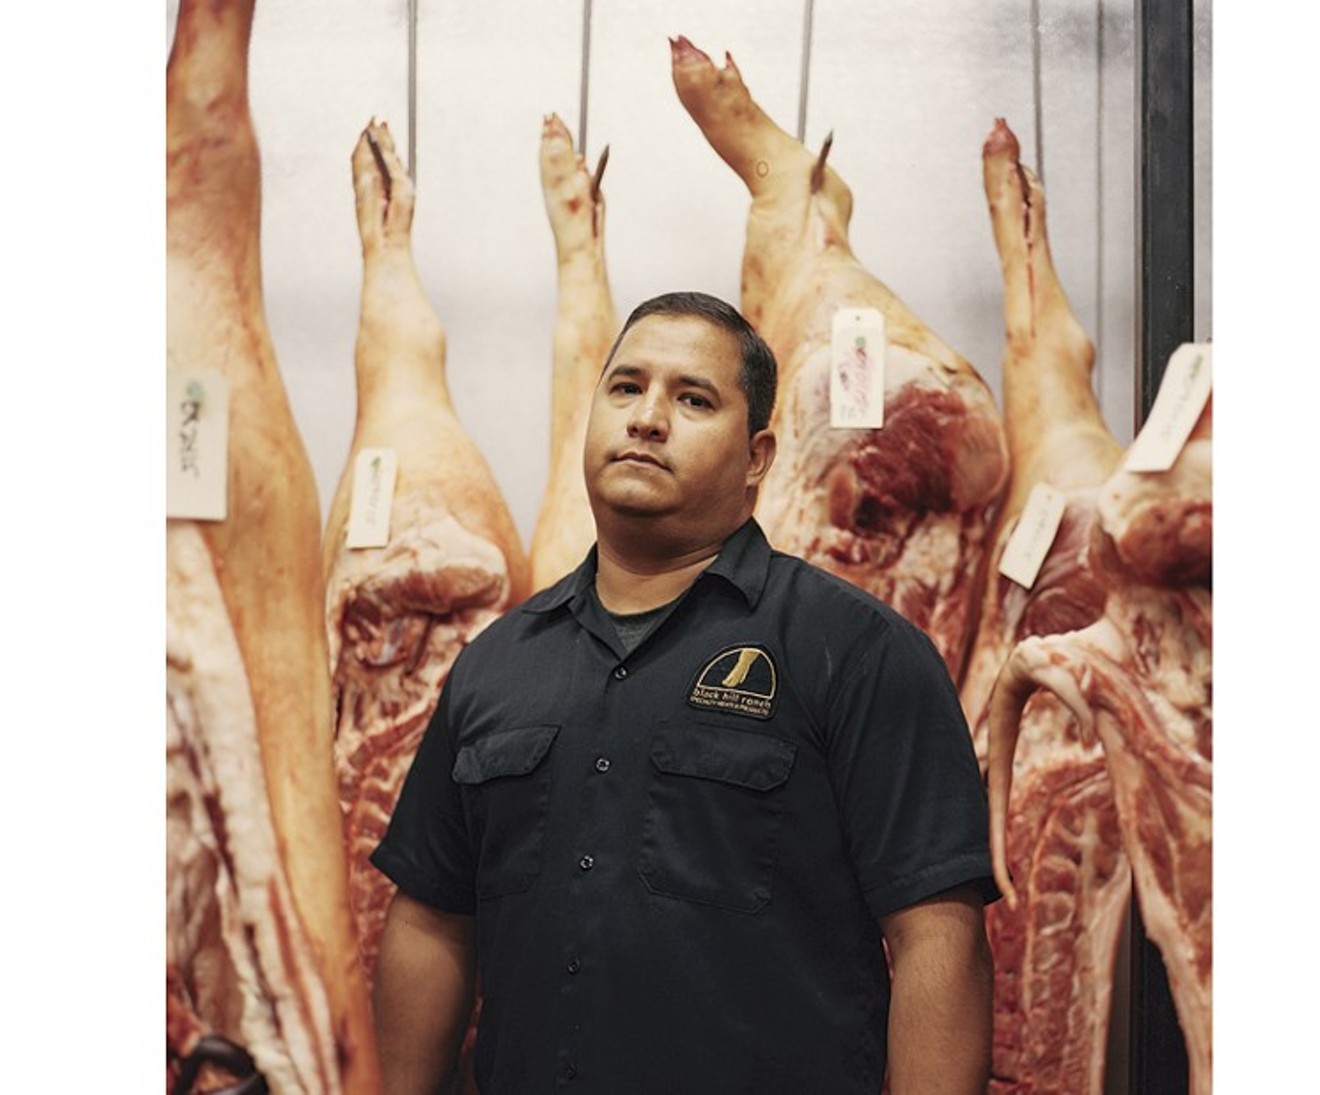 Felix Florez brings a new Boucherie vs. Matanza competition to this year's Butcher's Ball in Brenham.